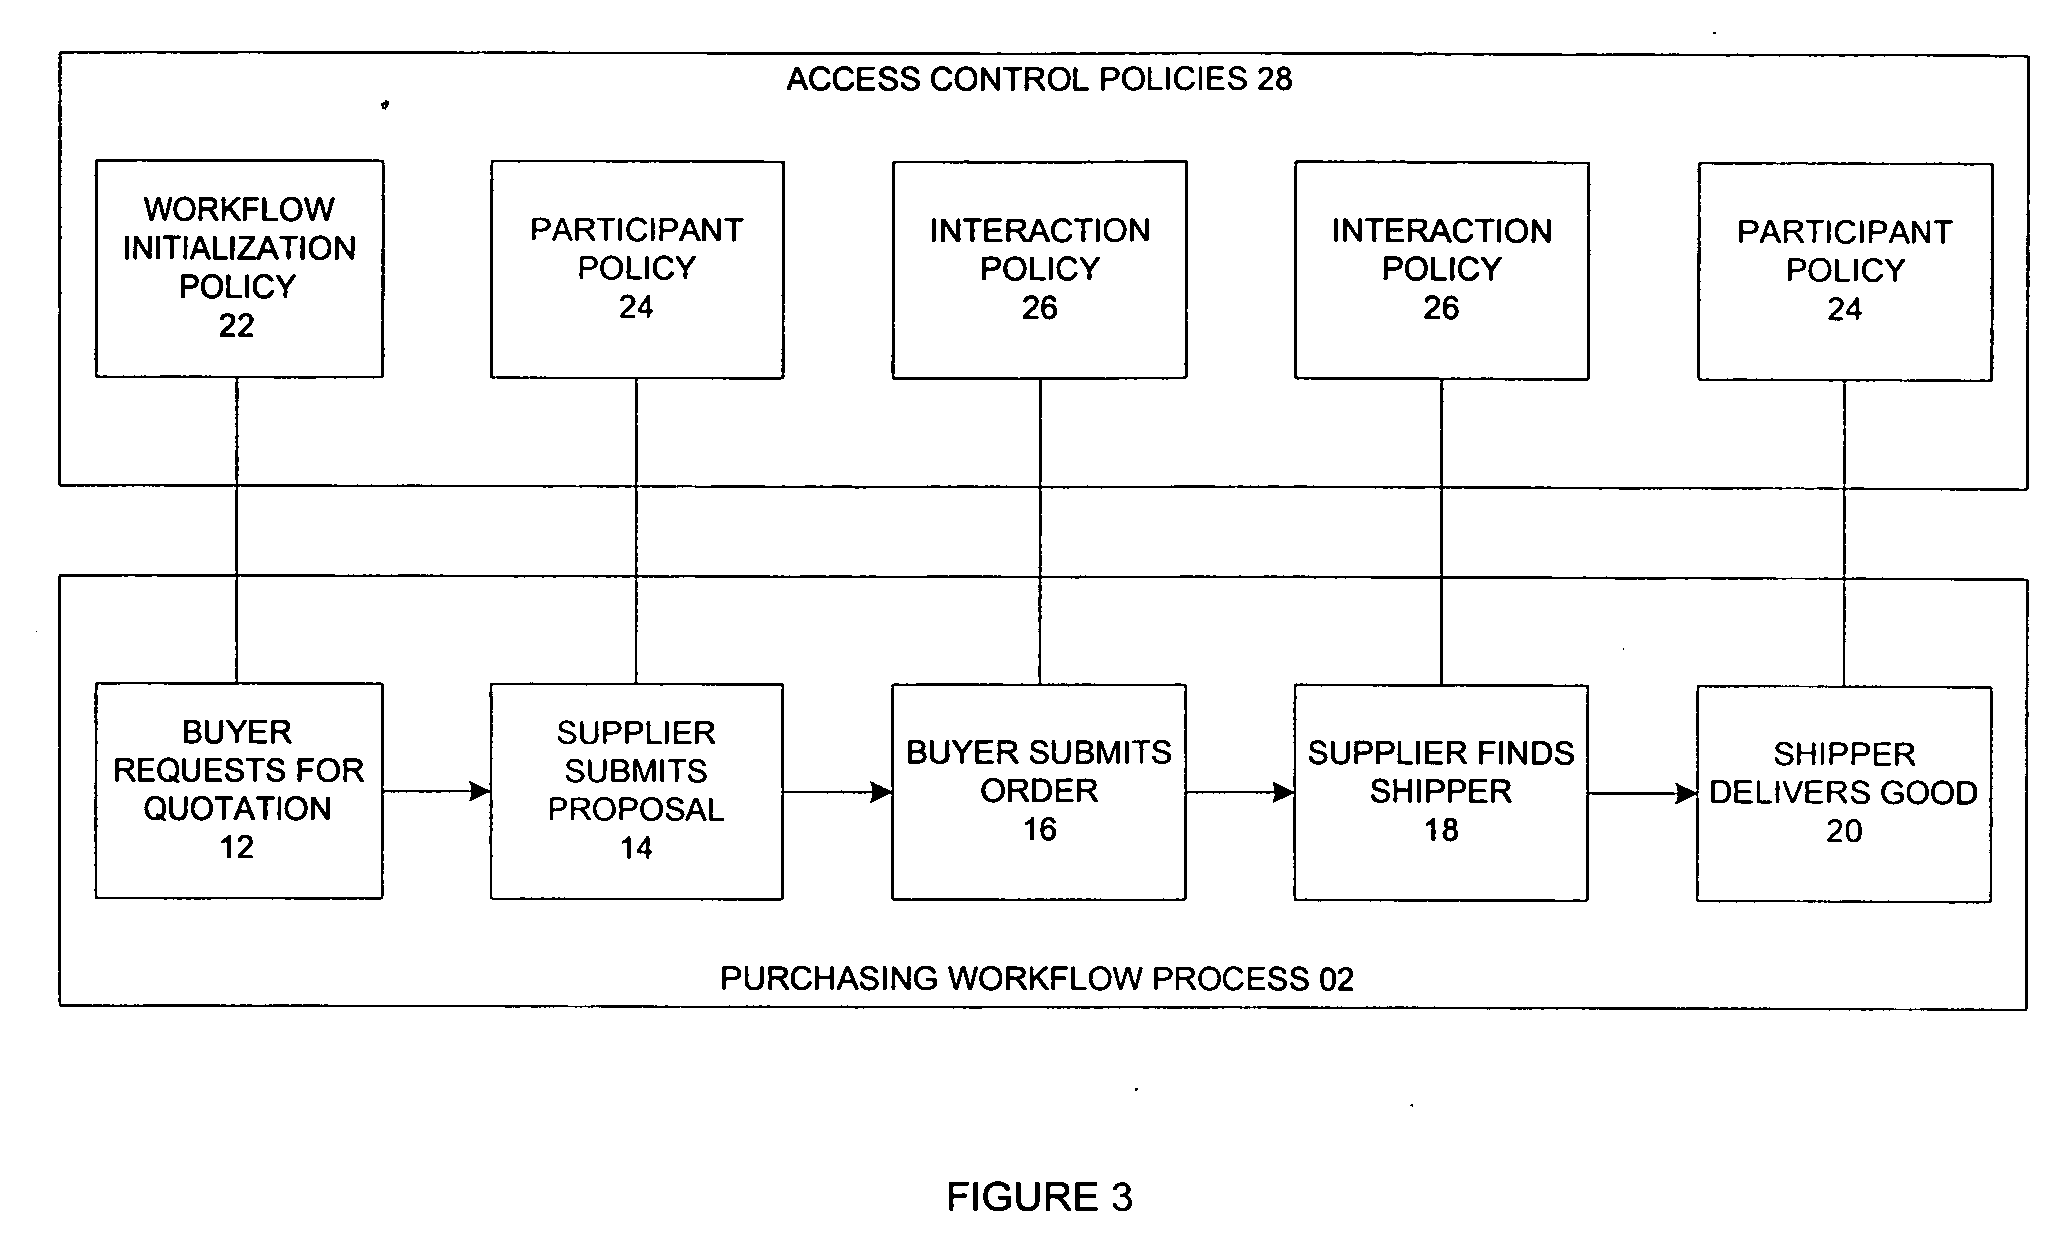 Automated generation of access control policies in cross-organizational workflow